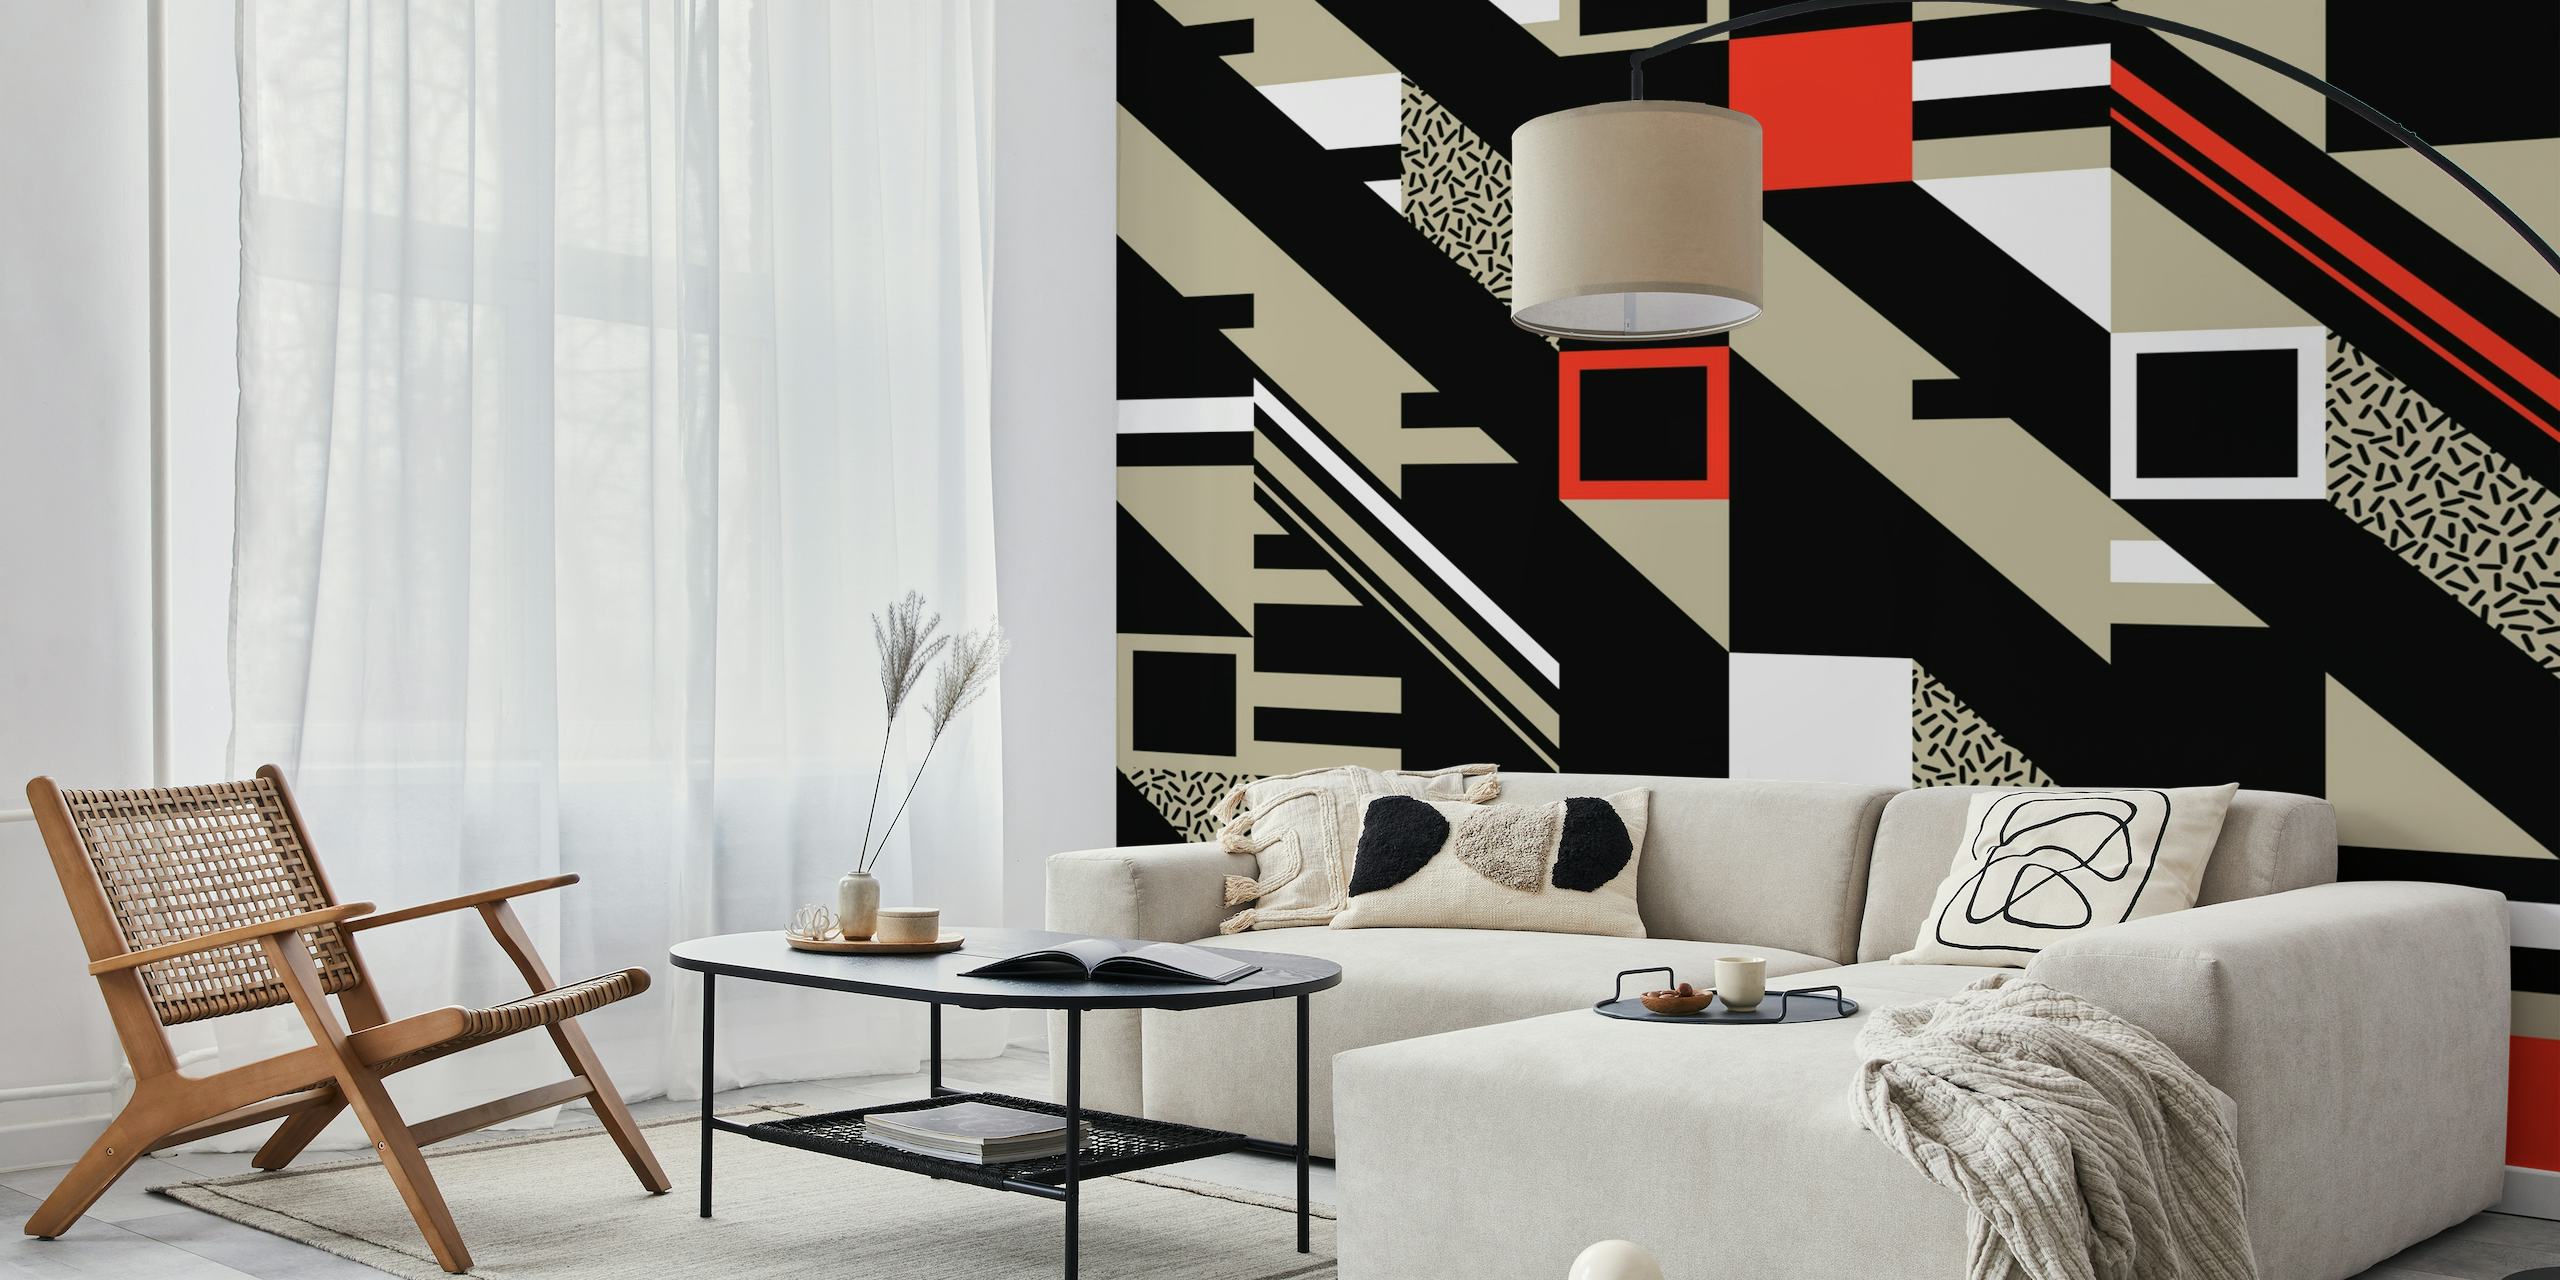 Abstract geometric pattern wall mural in black, white, and red